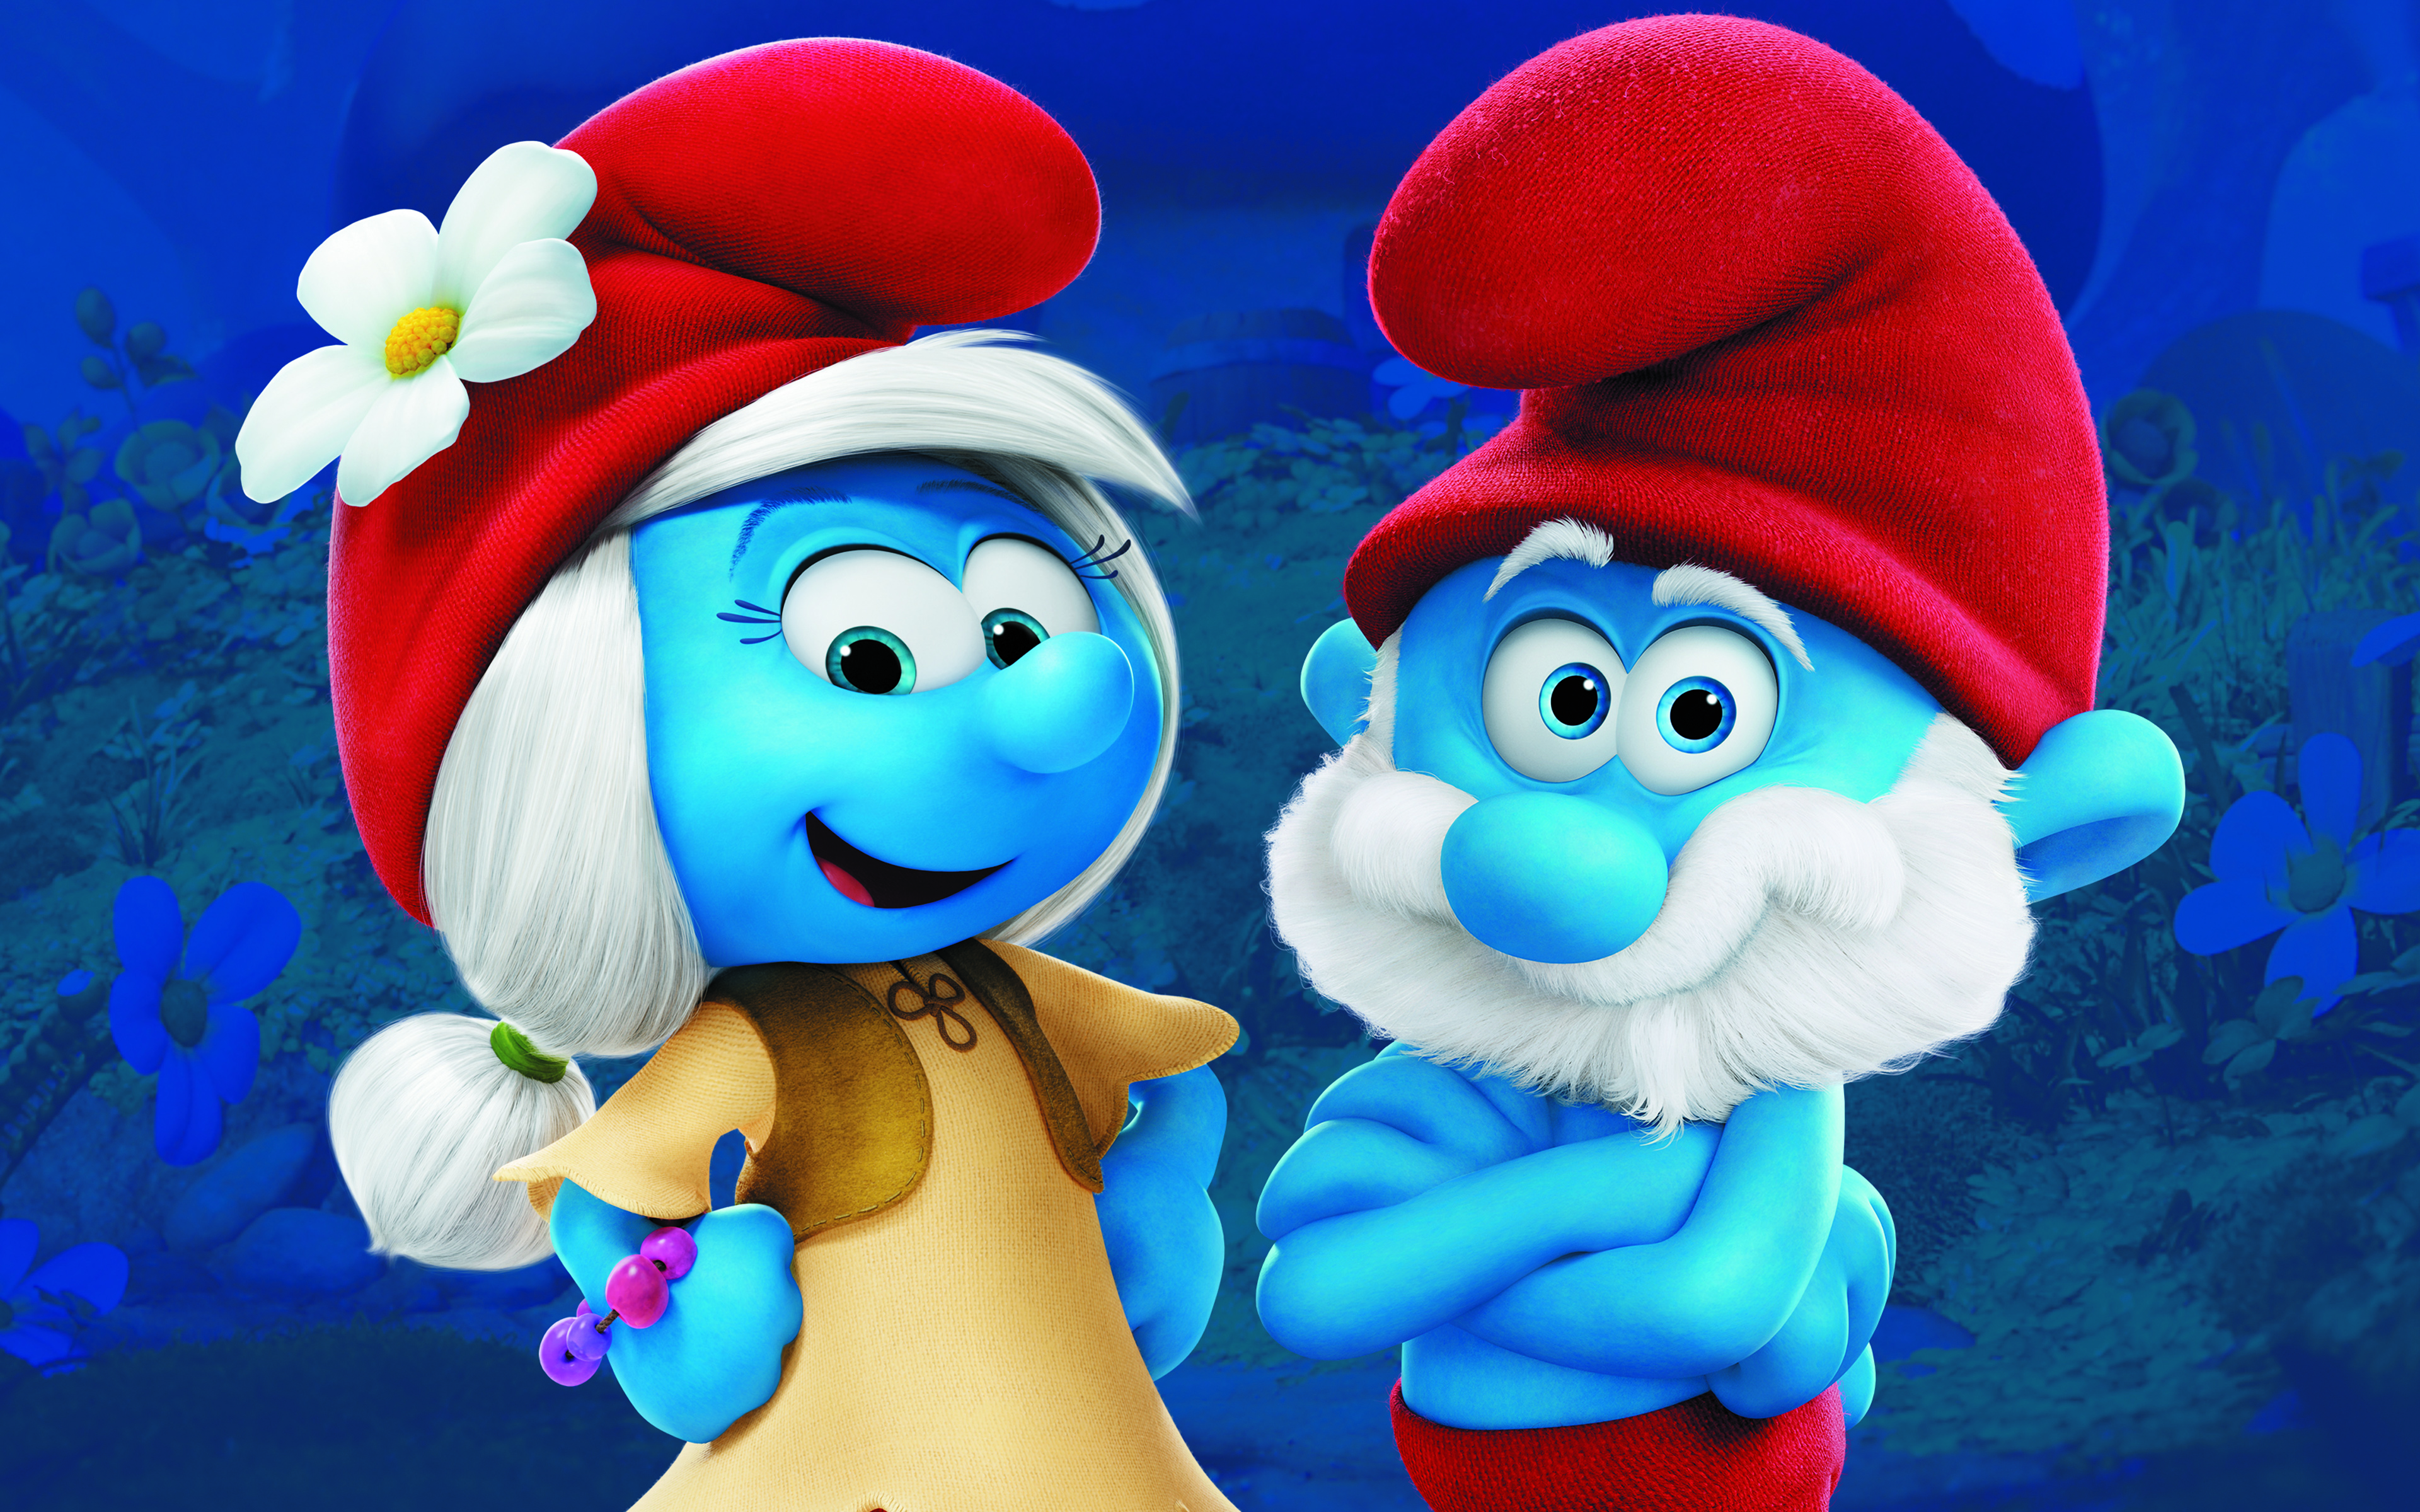 Download wallpapers Smurfs, The Lost Village, 2017, Smurfs 3, 4k, character...